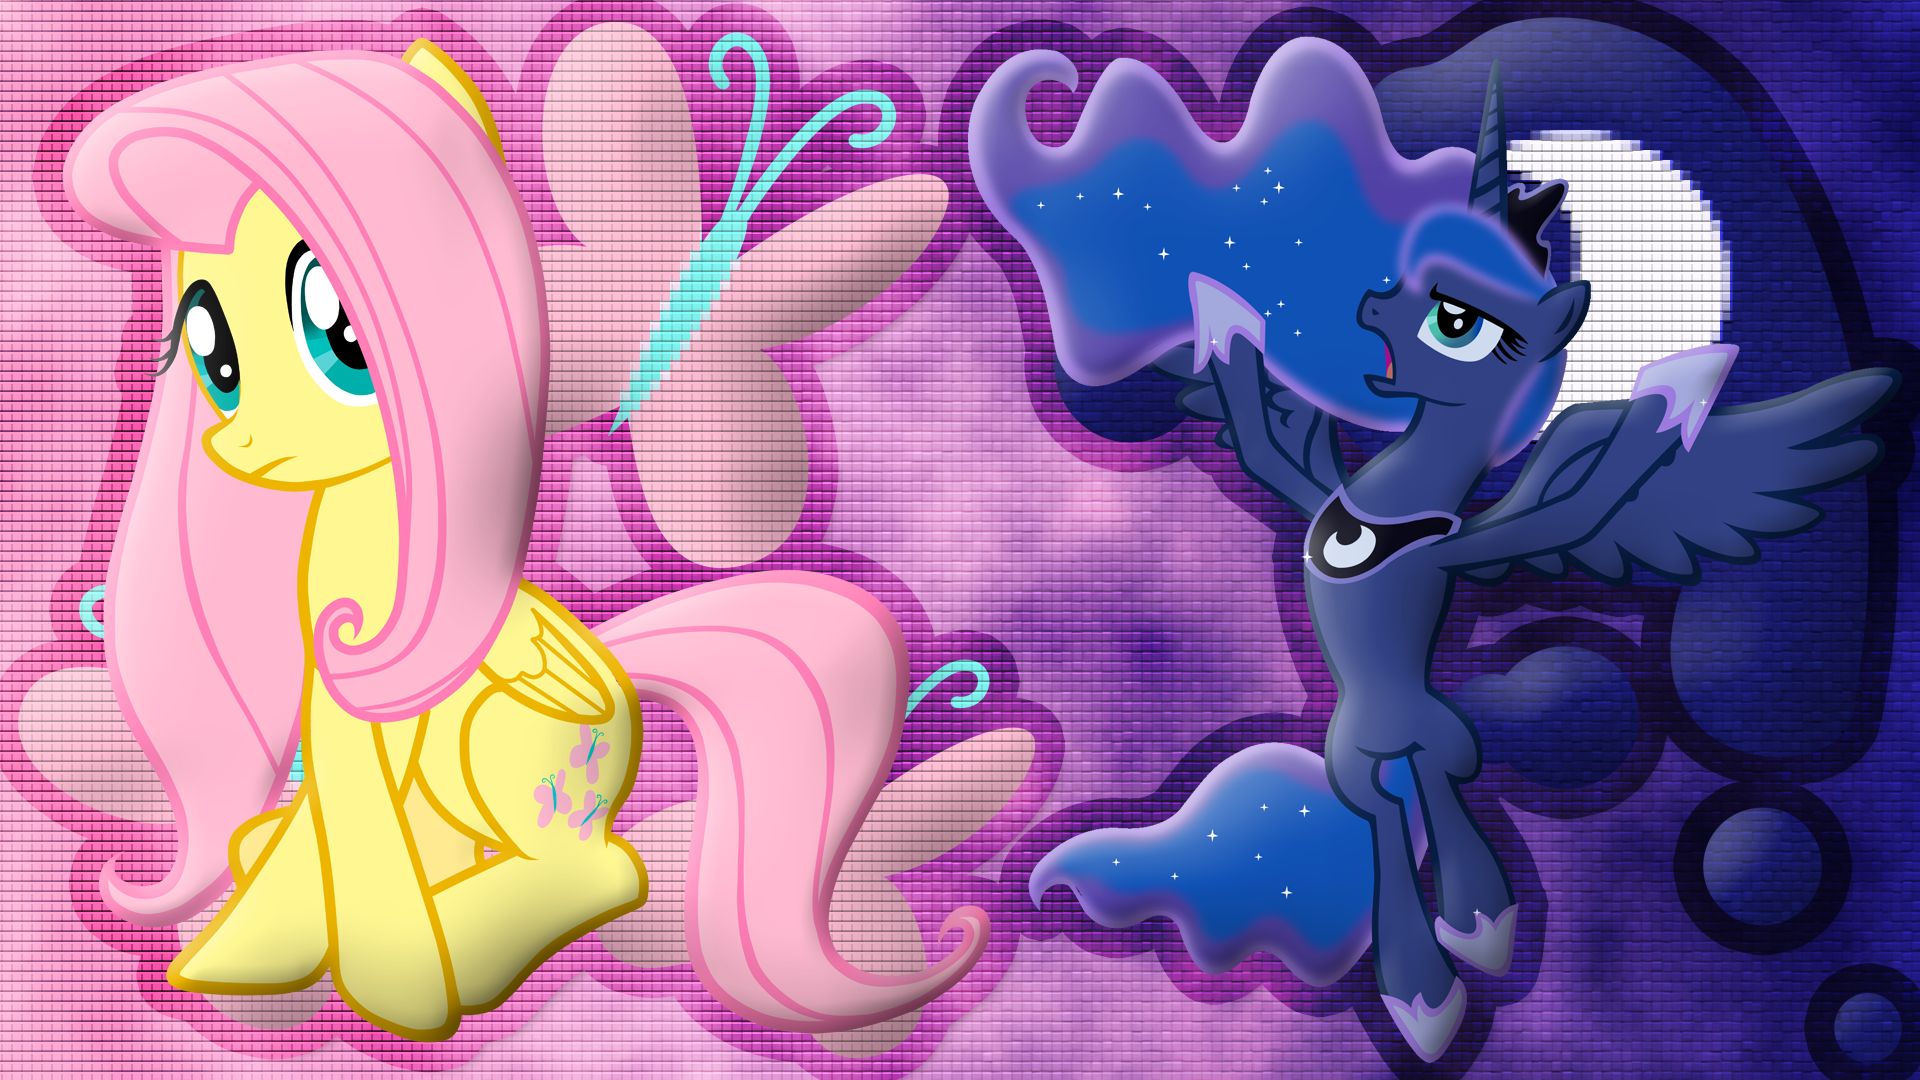 Fluttershy and Princess Luna [Stream One] by Durpy, Fiftyniner and fluttershy7